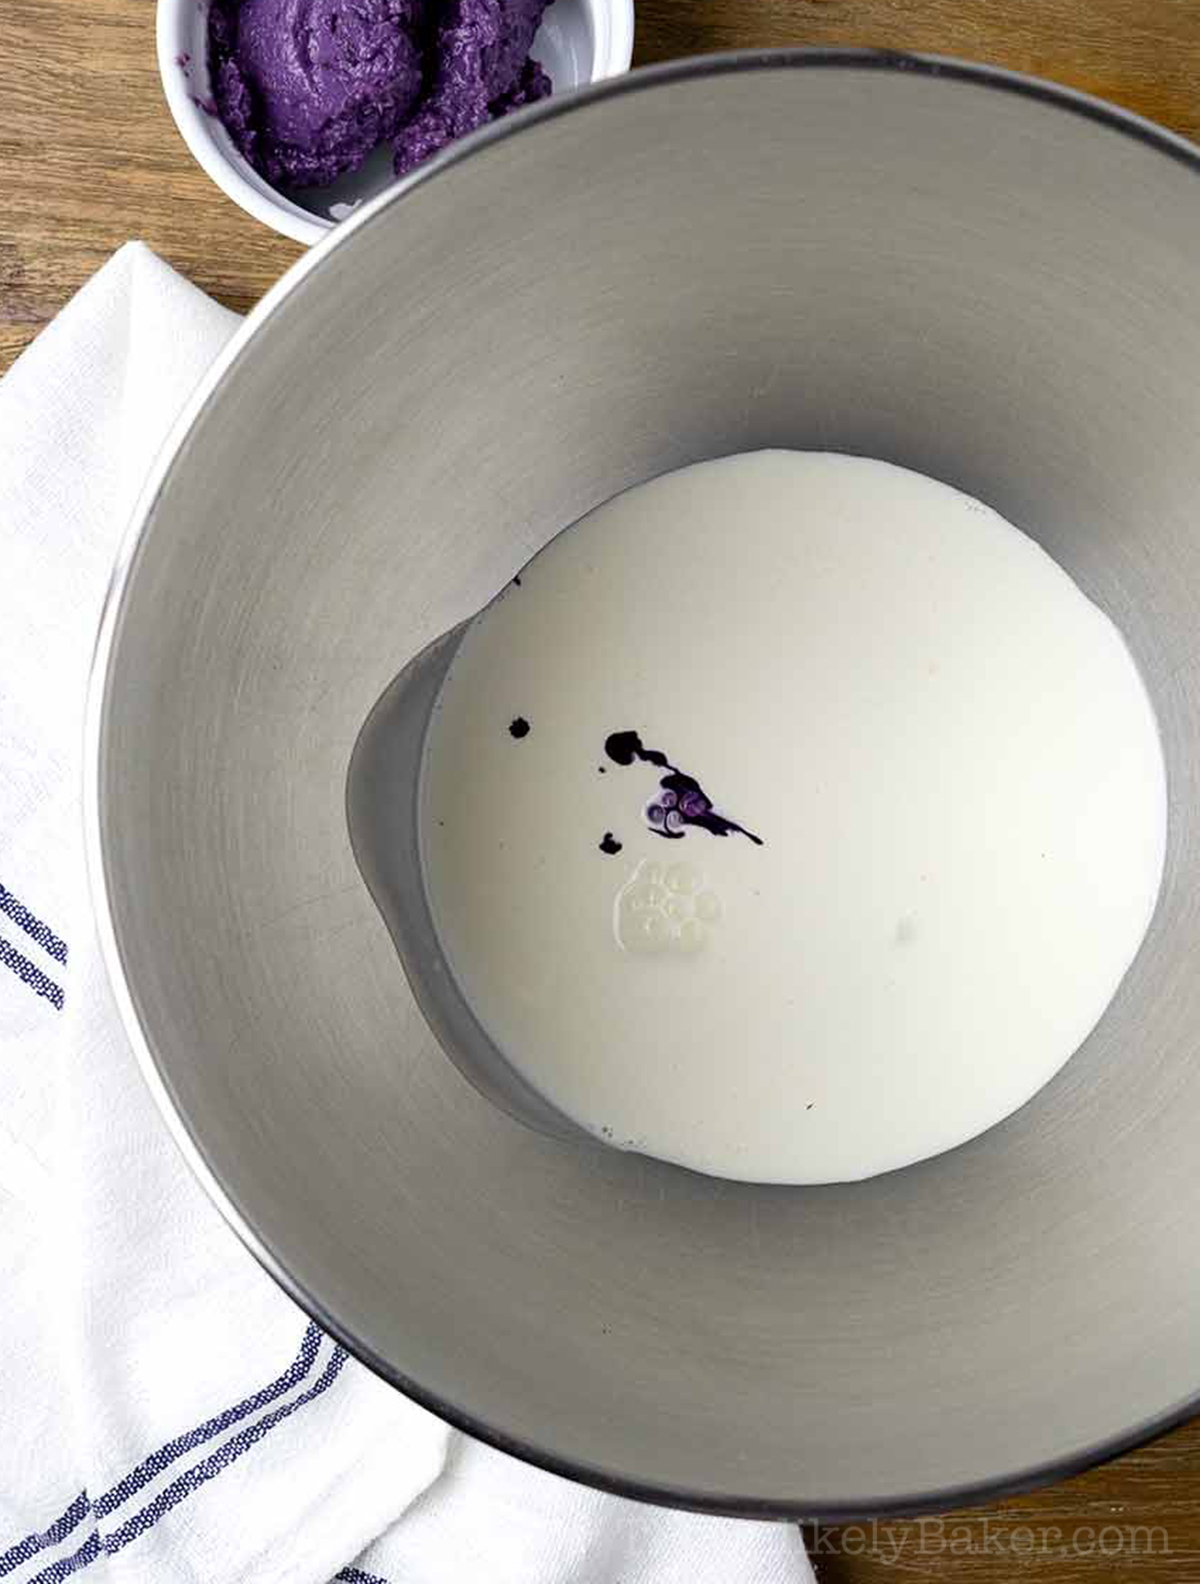 Heavy cream and ube extract in a bowl.